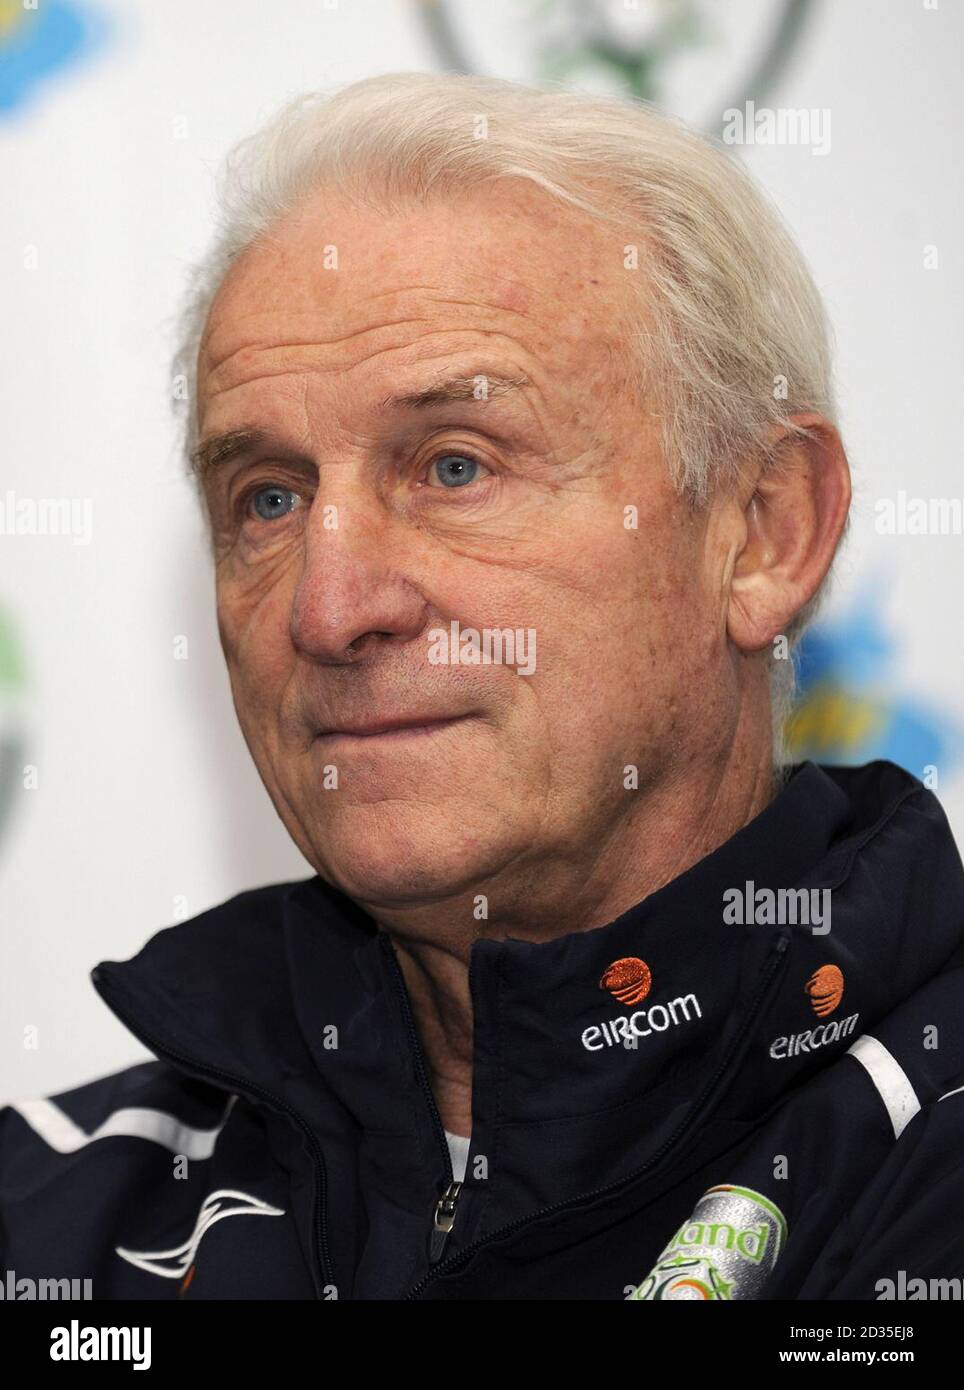 Republic of Ireland manager Giovanni Trapattoni during a press conference to announce a sponsorship agreement with Lucozade Sport, at the Grand Hotel in Malahide, Ireland. Stock Photo